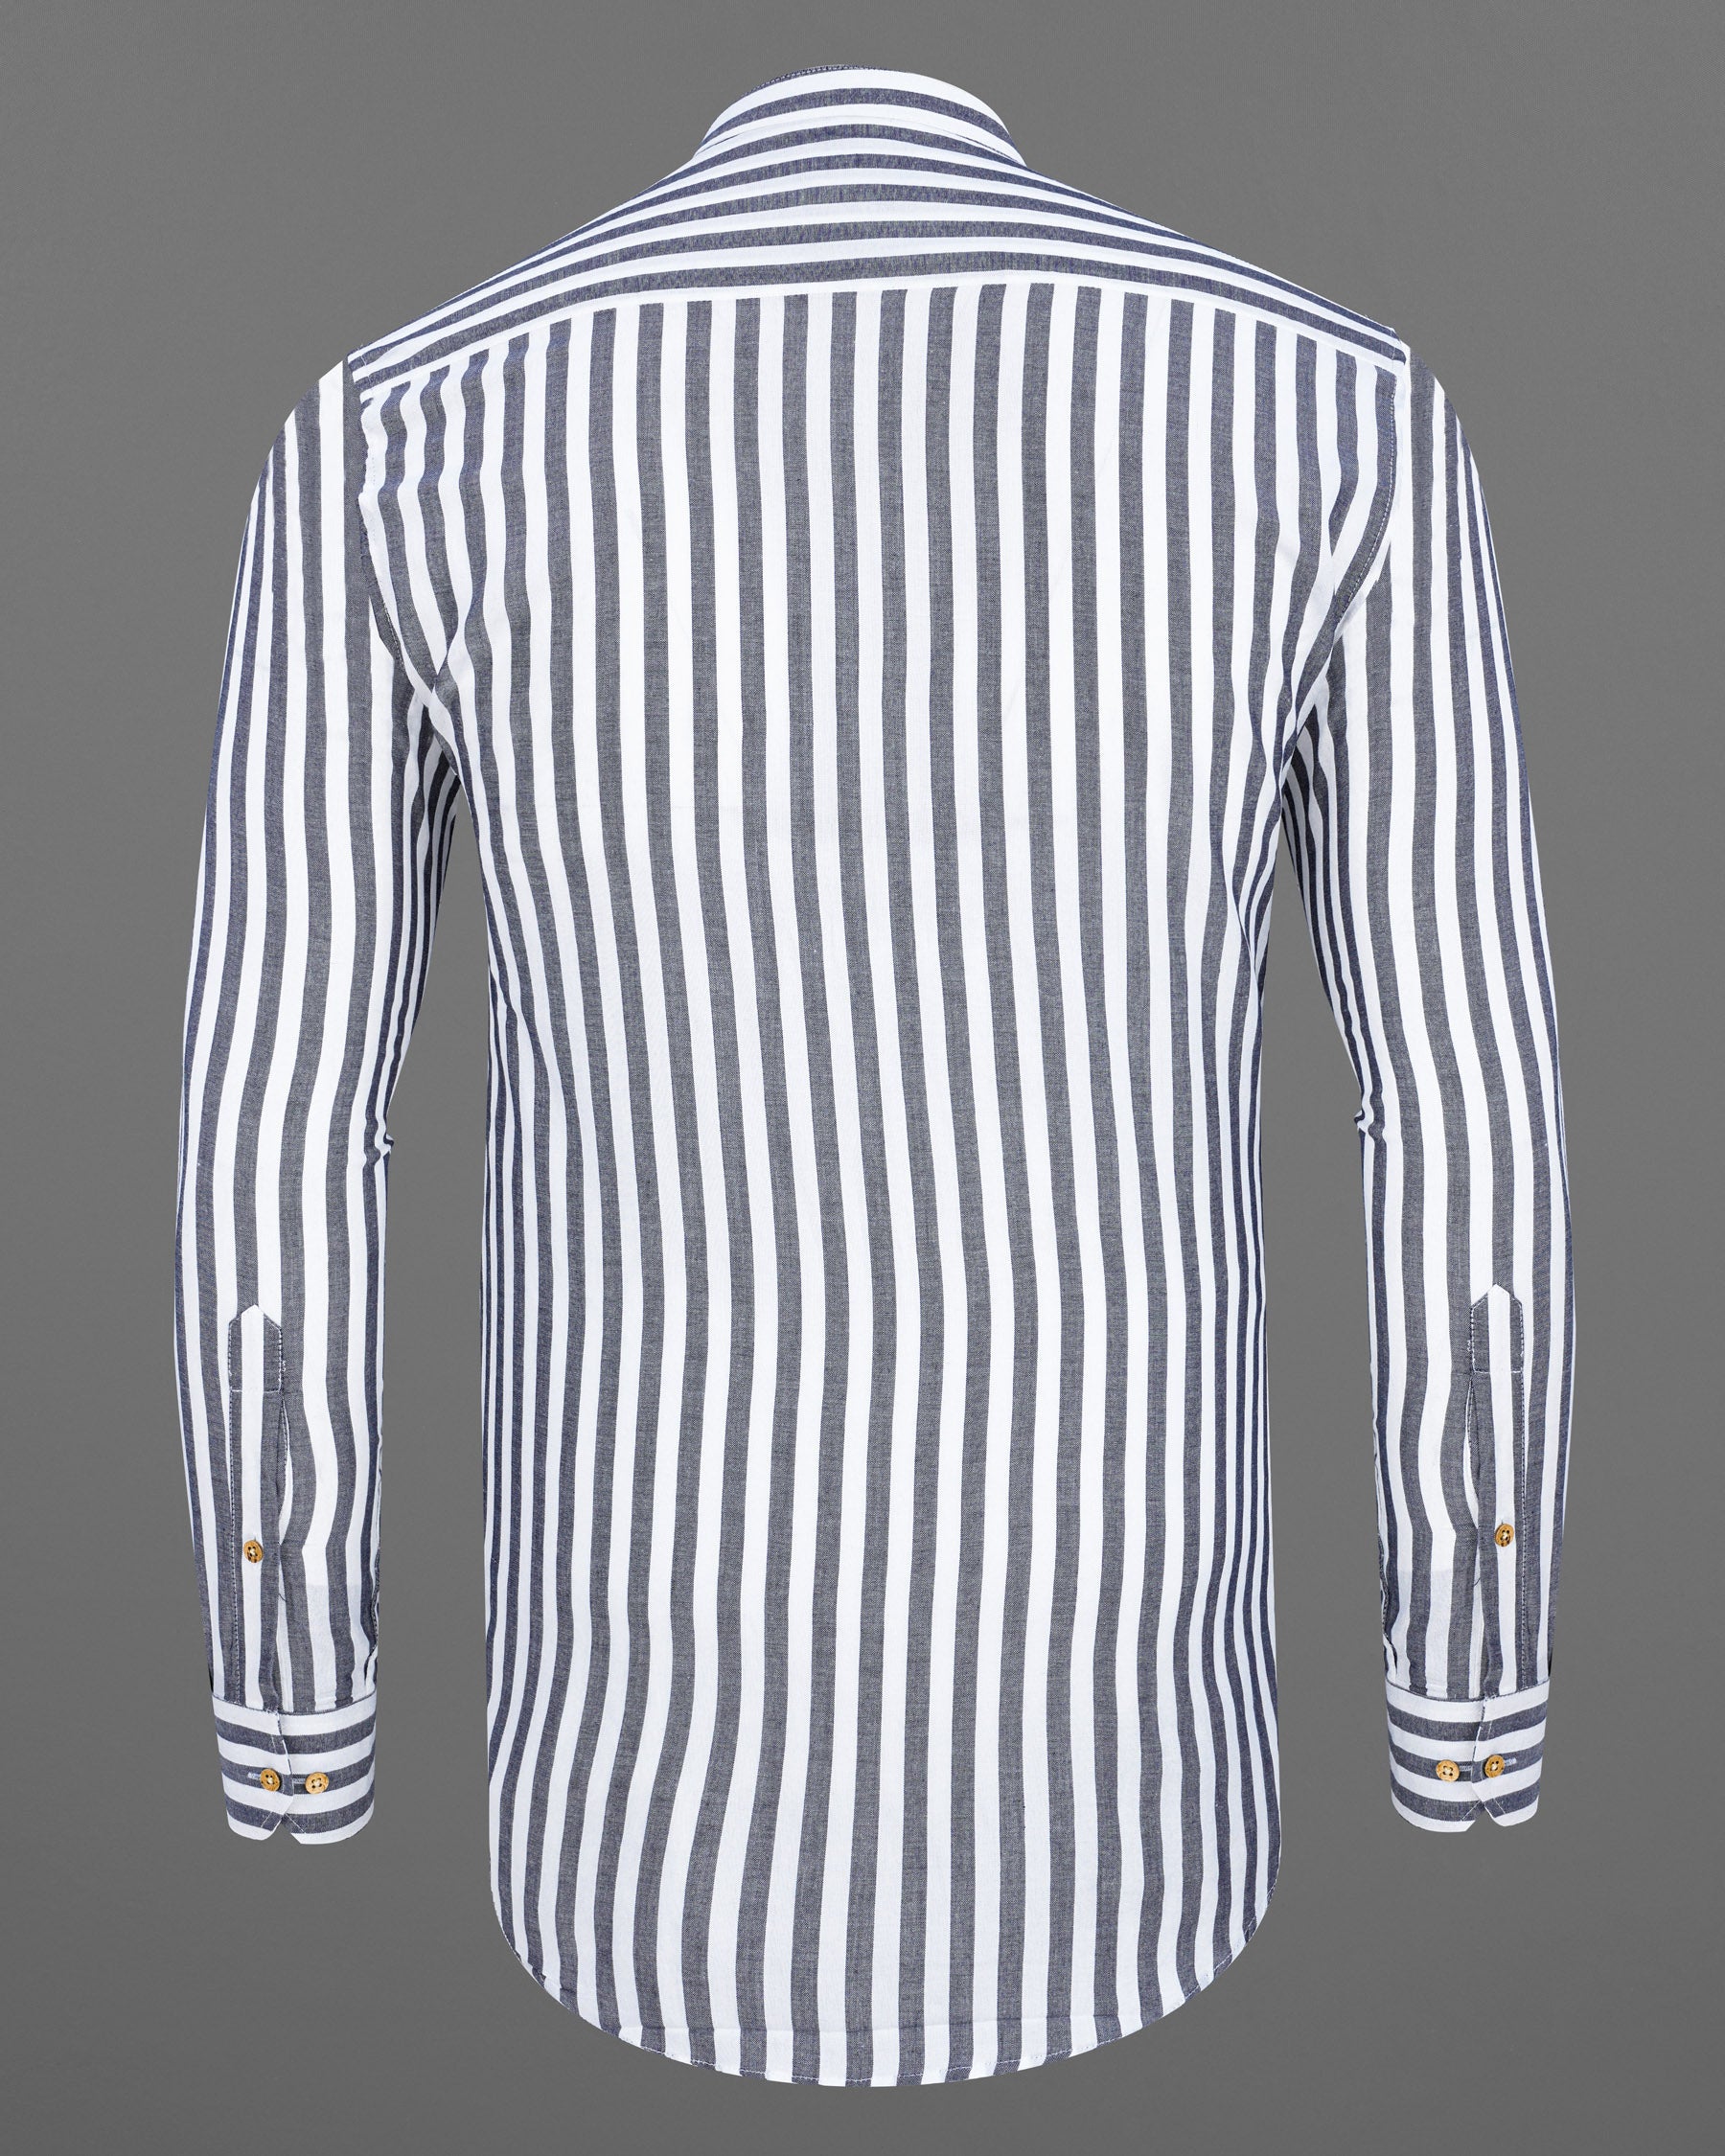 Bright White With Kimberly Gray Striped Premium Tencel Kurta Shirt 7798-KS-38, 7798-KS-H-38, 7798-KS-39,7798-KS-H-39, 7798-KS-40, 7798-KS-H-40, 7798-KS-42, 7798-KS-H-42, 7798-KS-44, 7798-KS-H-44, 7798-KS-46, 7798-KS-H-46, 7798-KS-48, 7798-KS-H-48, 7798-KS-50, 7798-KS-H-50, 7798-KS-52, 7798-KS-H-52